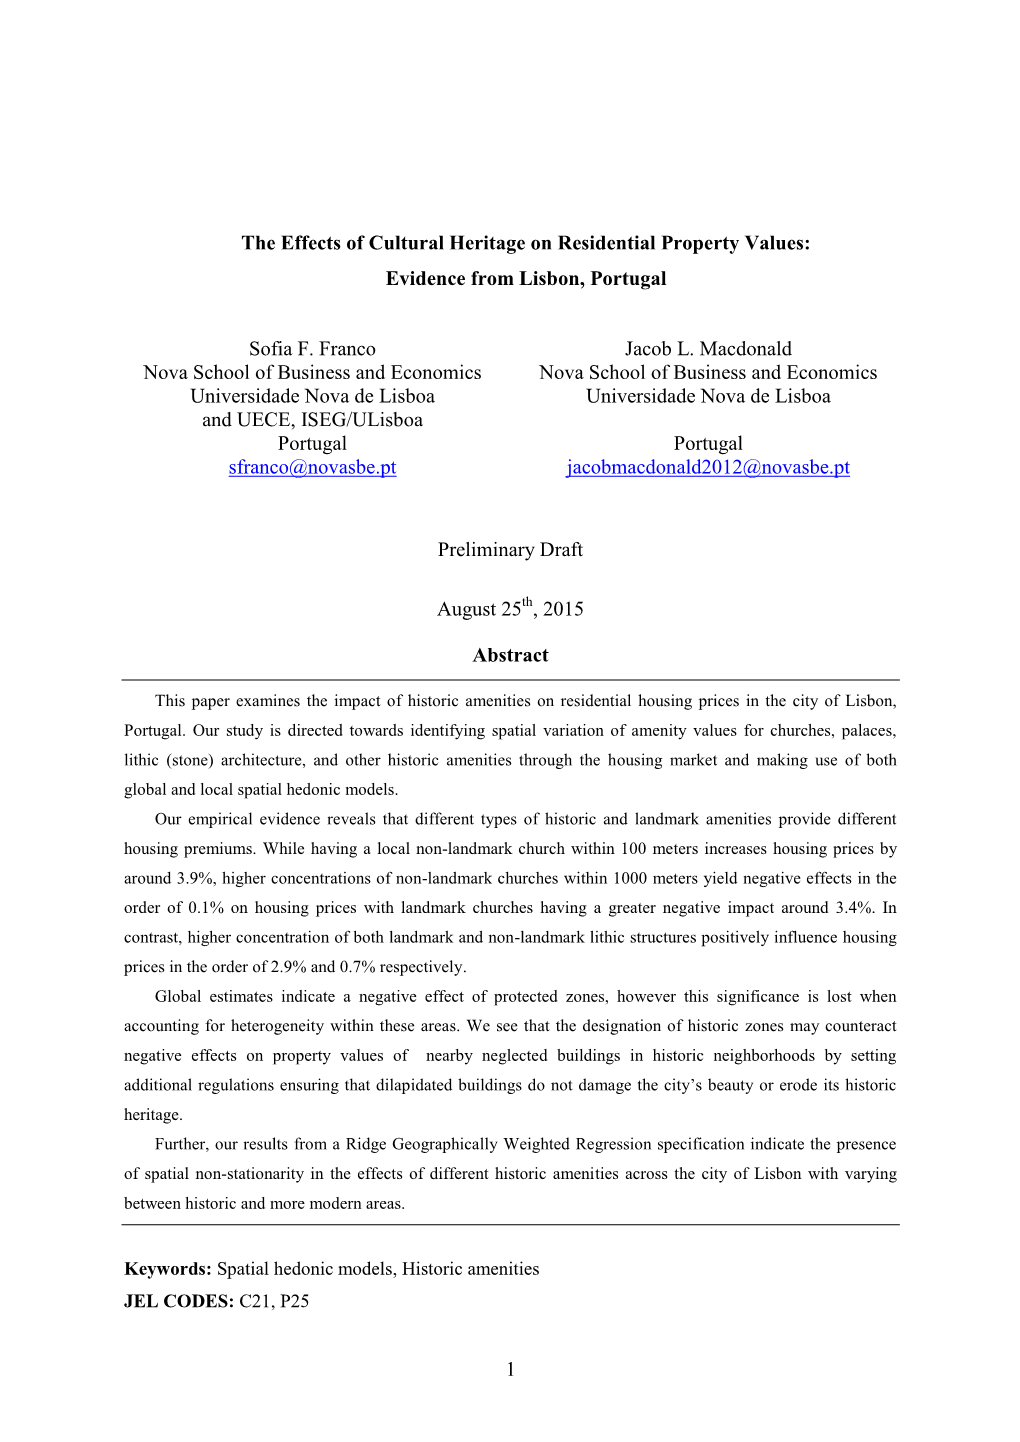 1 the Effects of Cultural Heritage on Residential Property Values